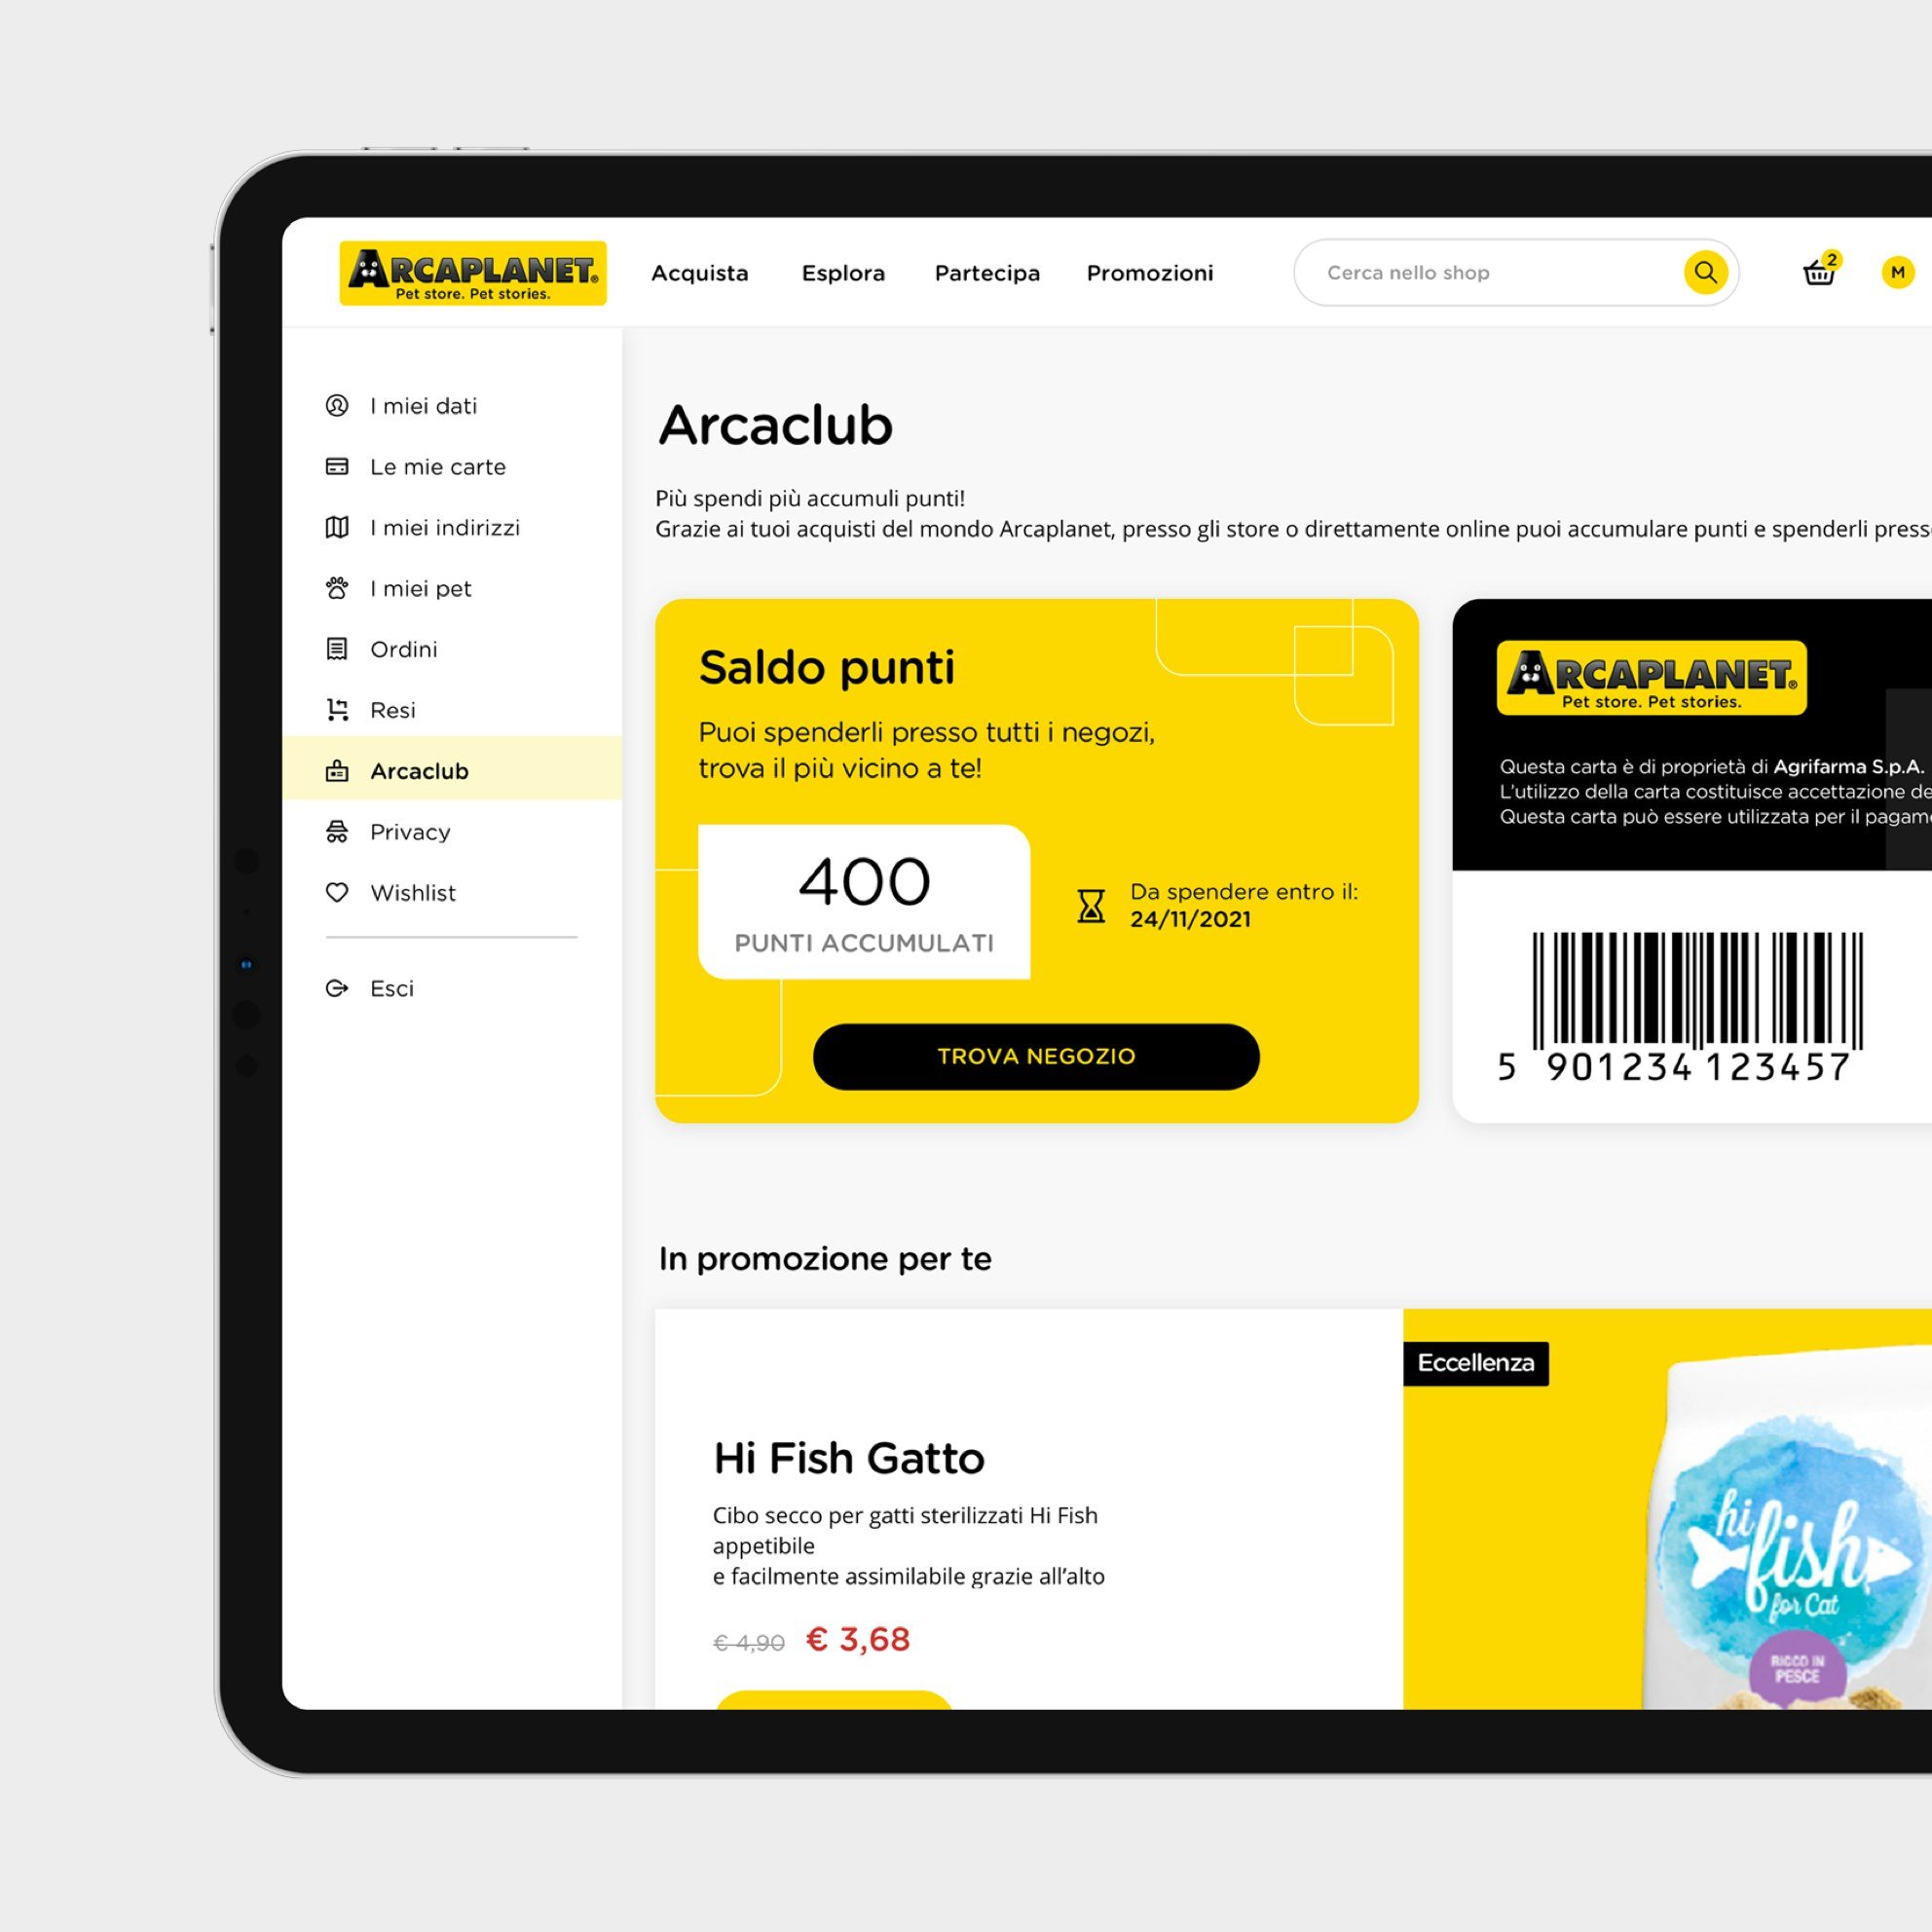 Arcaclub section interface in the user's personal area, with display of loyalty card and points balance